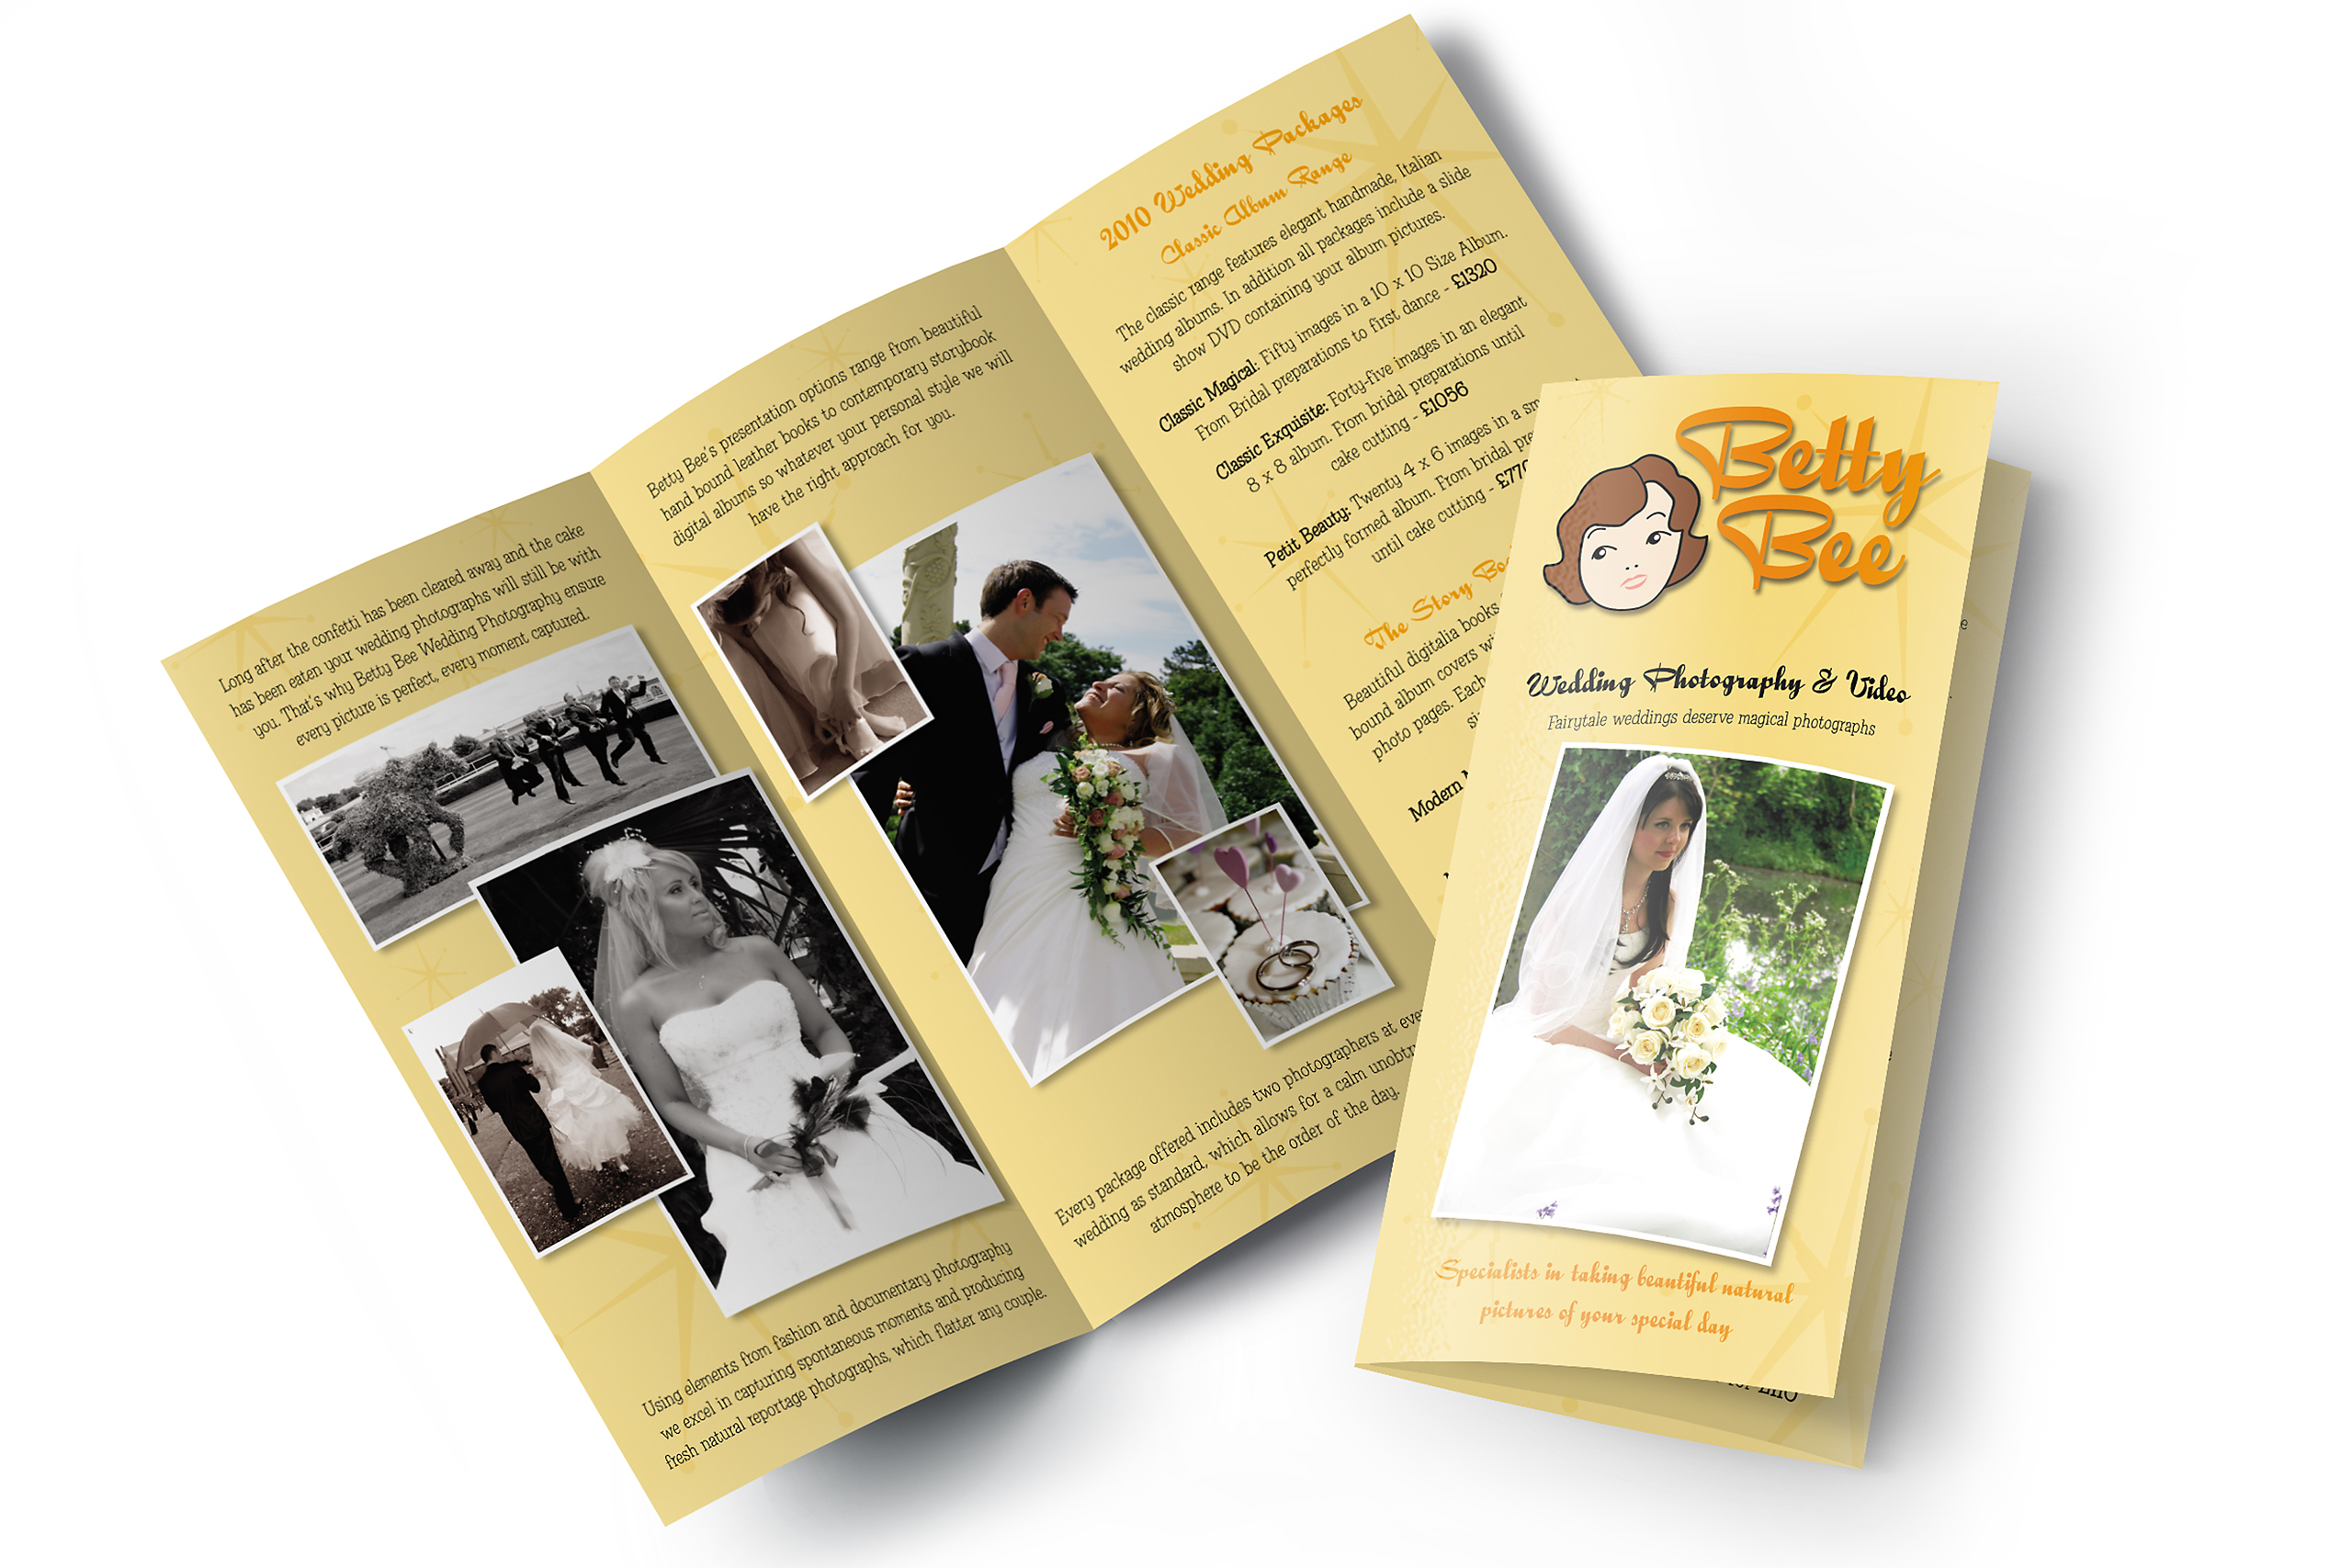 Trifold leaflet for Betty Bee Photography